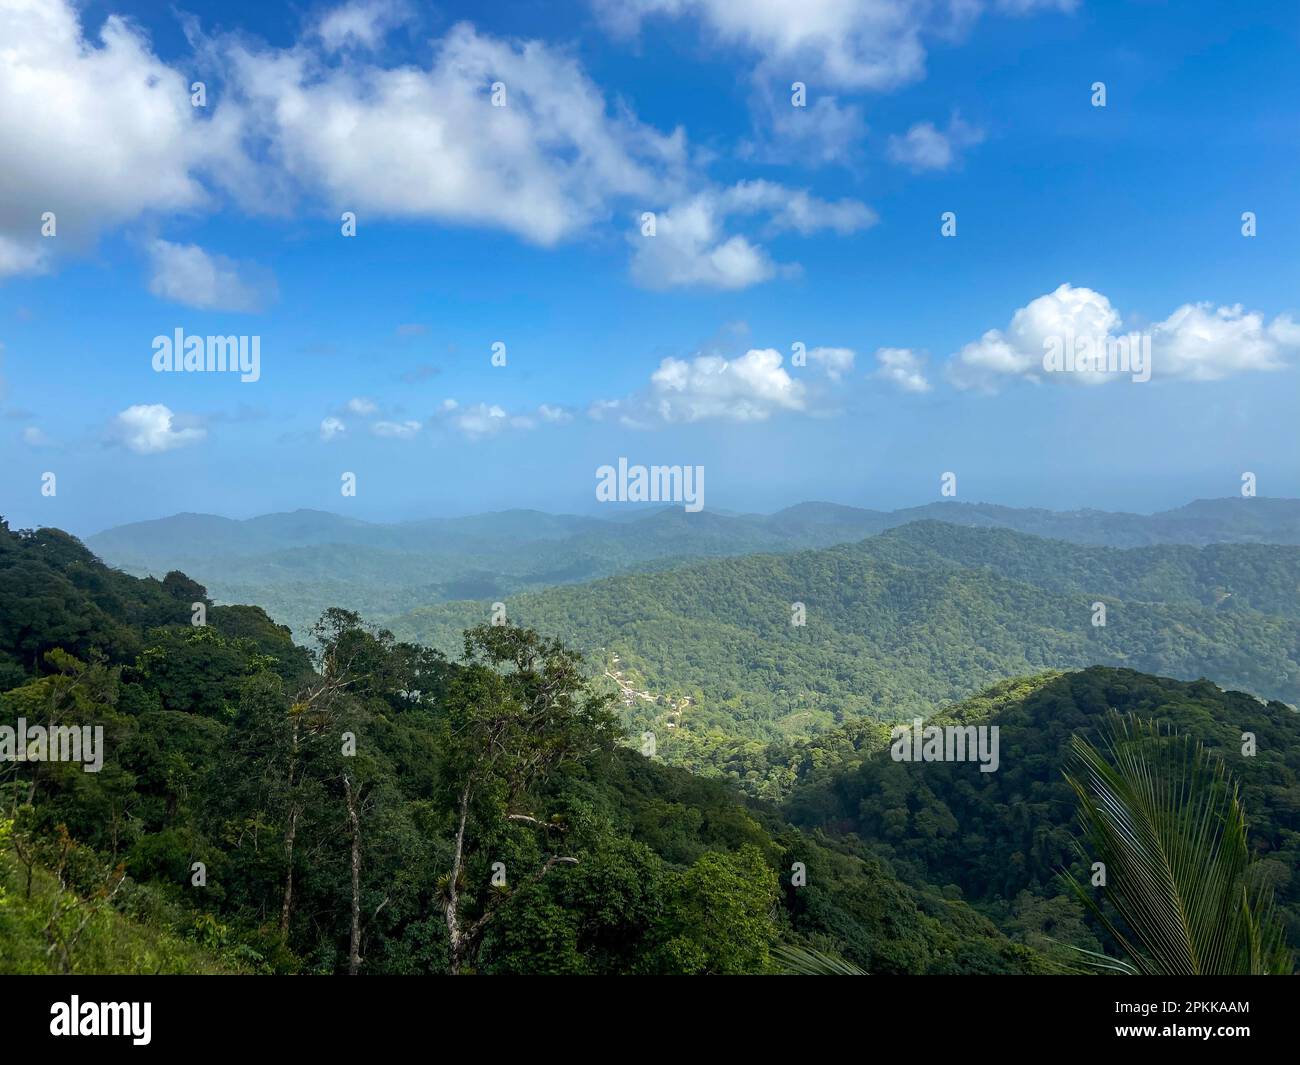 Beautiful expanse of lush, tropical rainforest located on the island of Trinidad in the Caribbean. Stock Photo